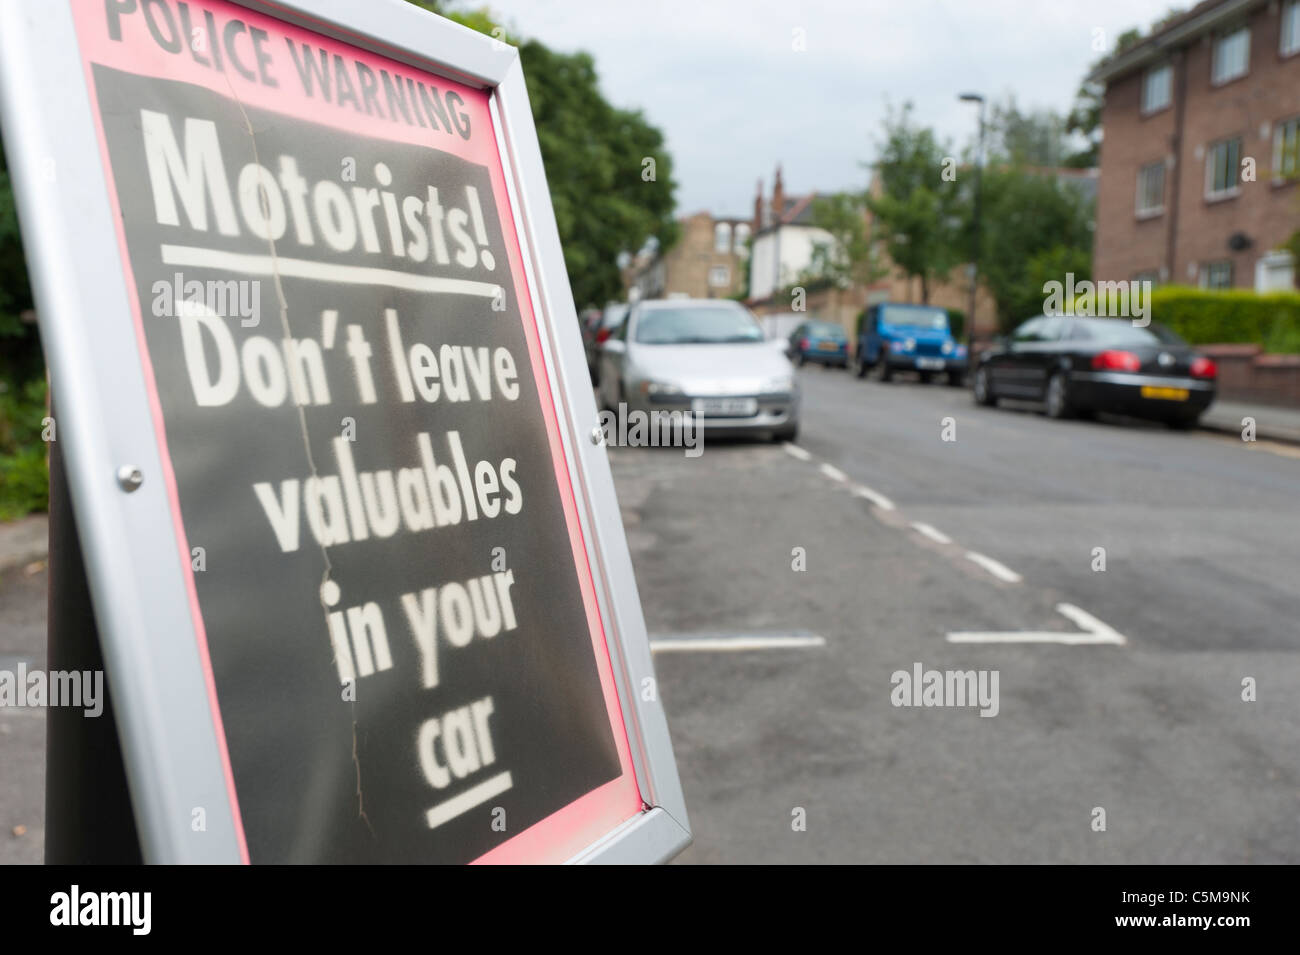 Police notice warning motorists not to leave valuables in your car. Inner city, London England. Stock Photo